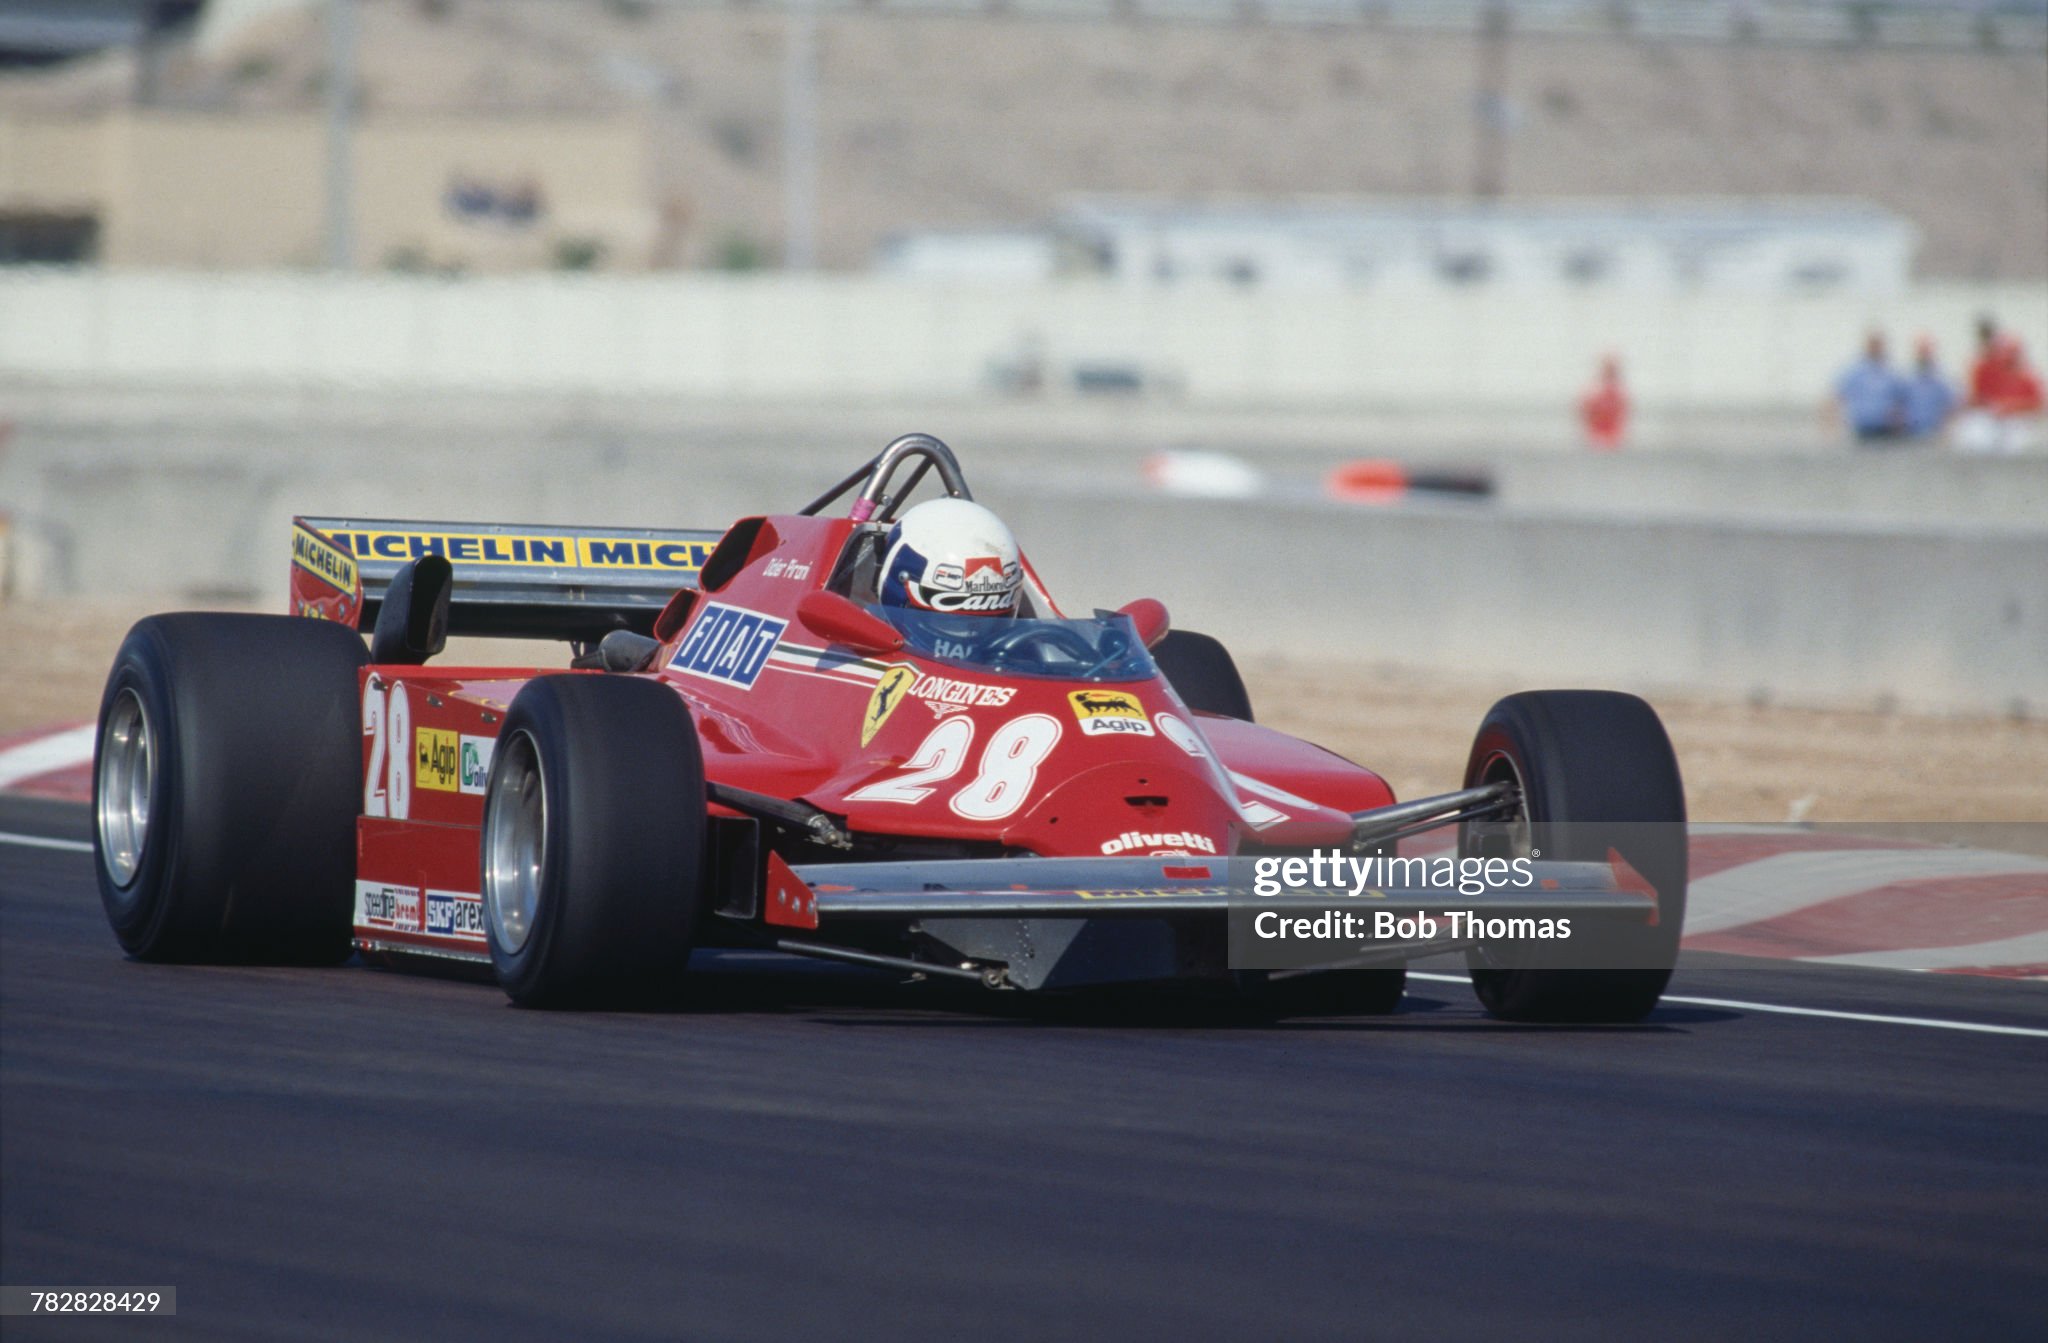 French racing driver Didier Pironi drives the n. 28 Ferrari 126CK to finish in 9th place in the 1981 Caesars Palace Grand Prix in Las Vegas, Nevada, on 17th October 1981. 